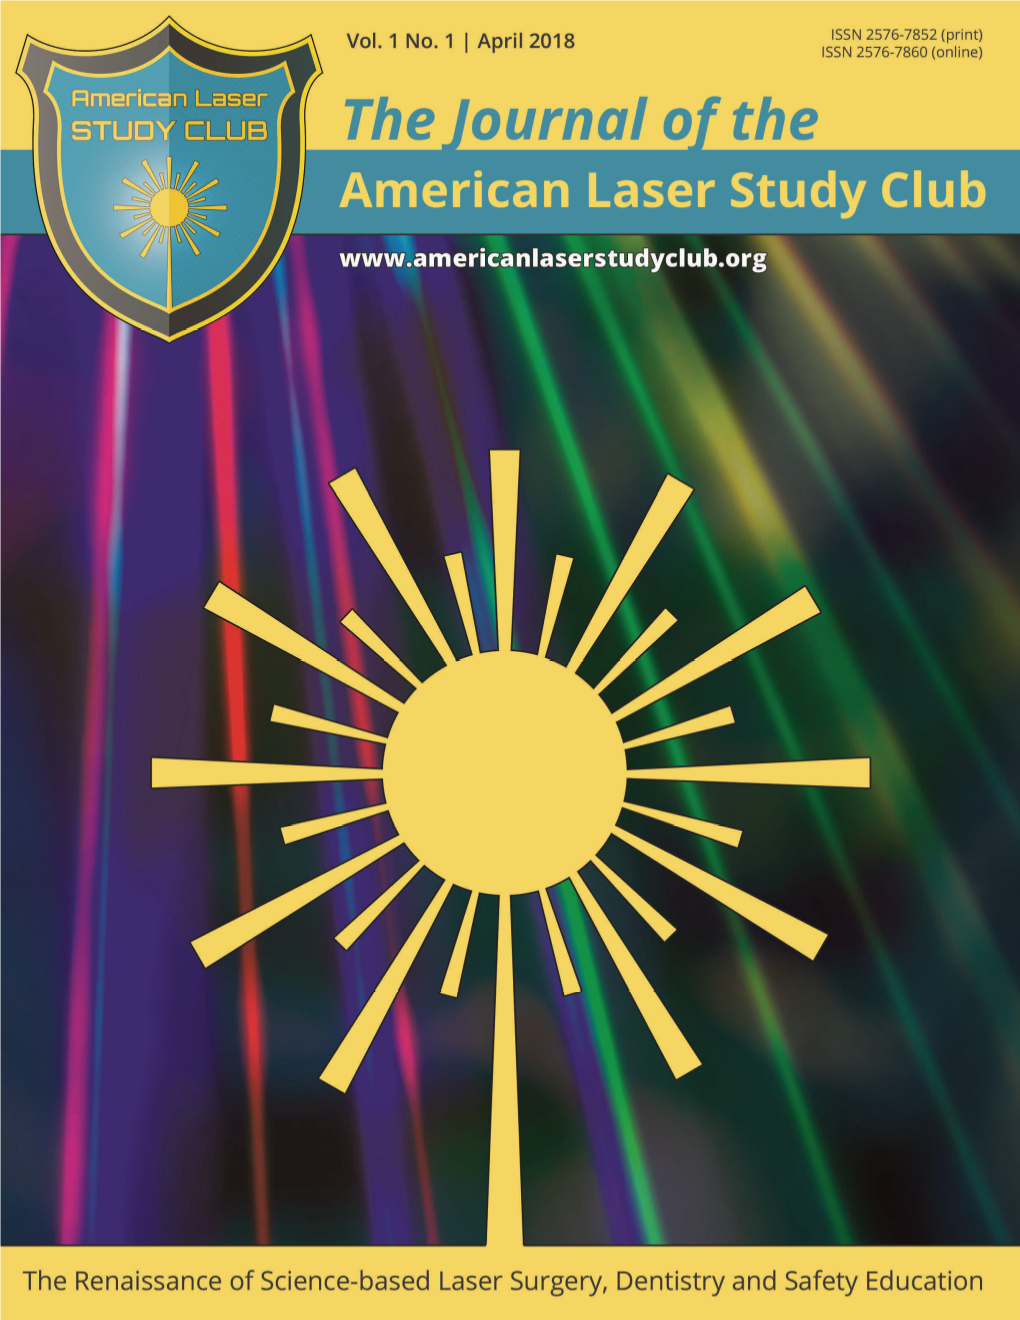 The Journal of the American Laser Study Club | April 2018 Vol.1, No